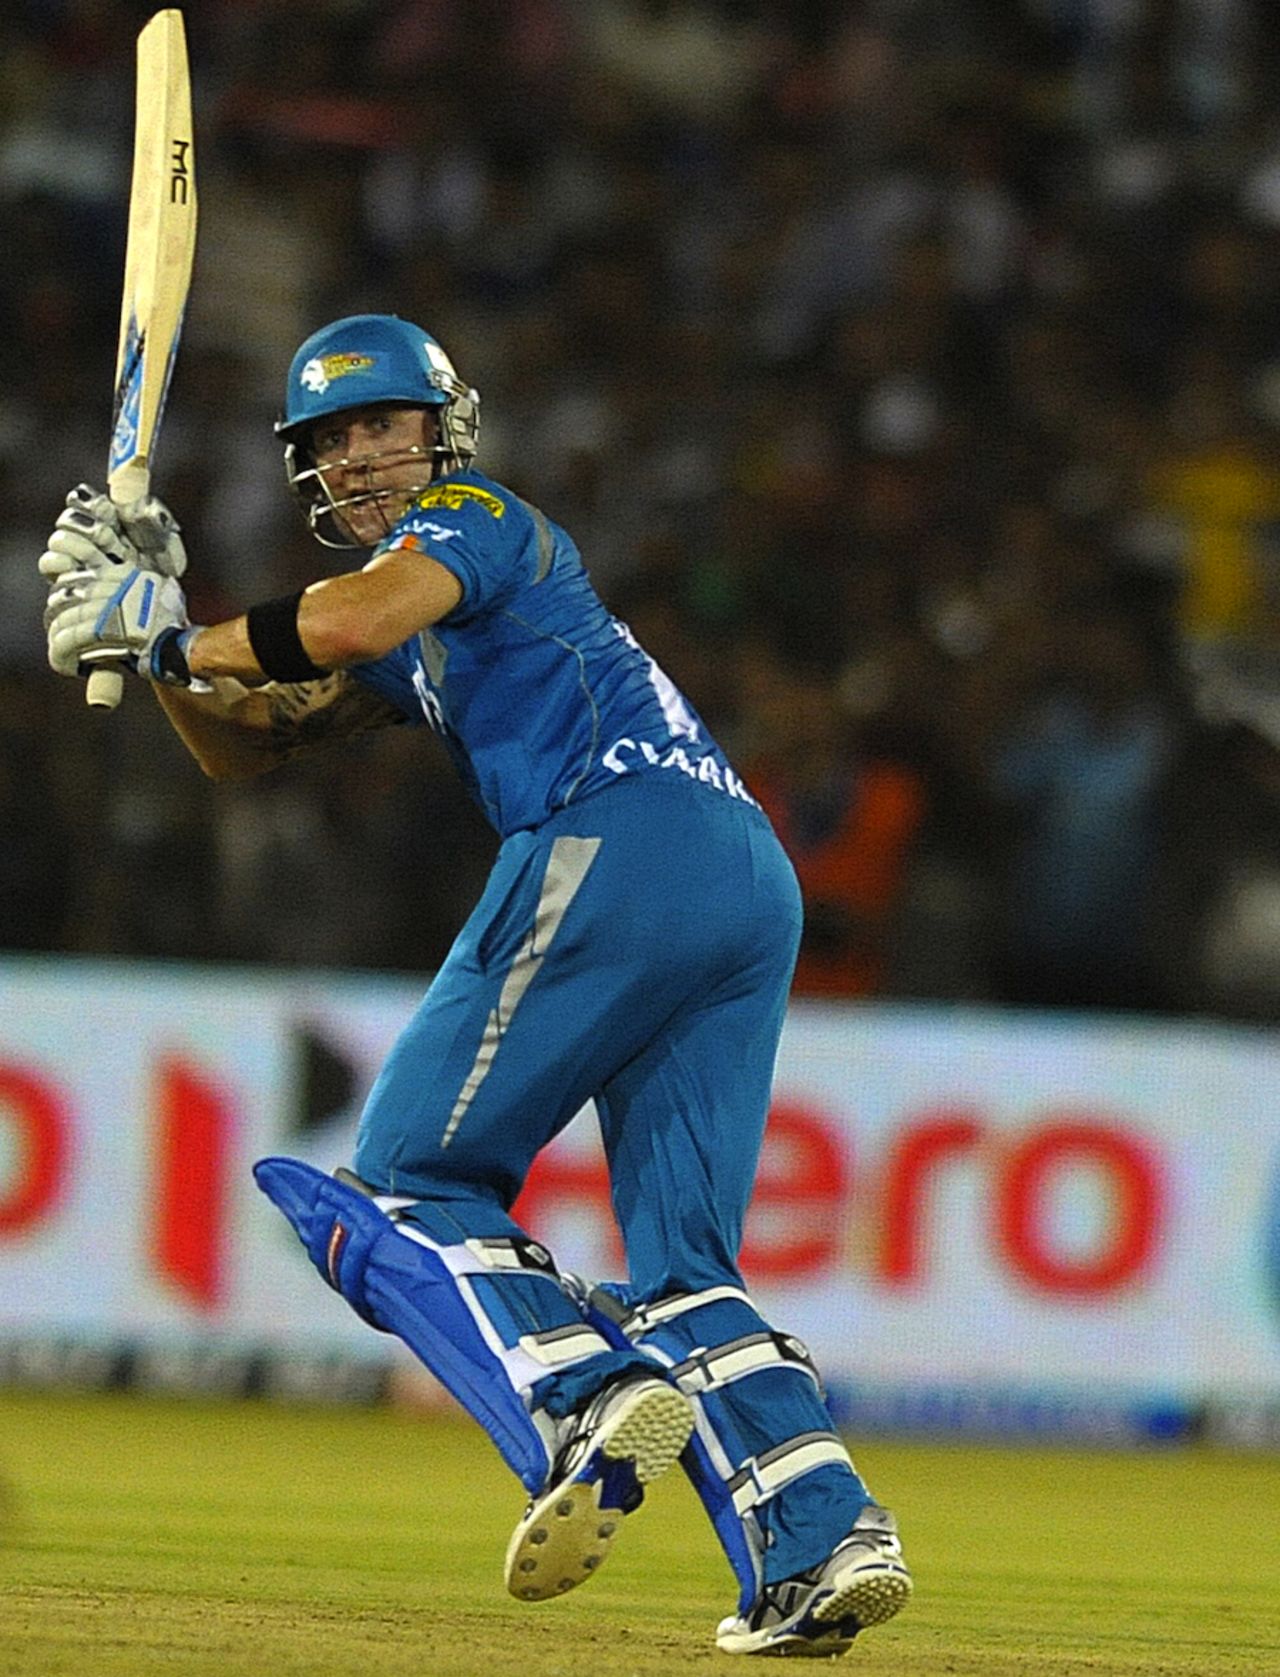 Michael Clarke scored 41 in his debut game in IPL, Deccan Chargers v Pune Warriors, IPL, Cuttack, May 1, 2012